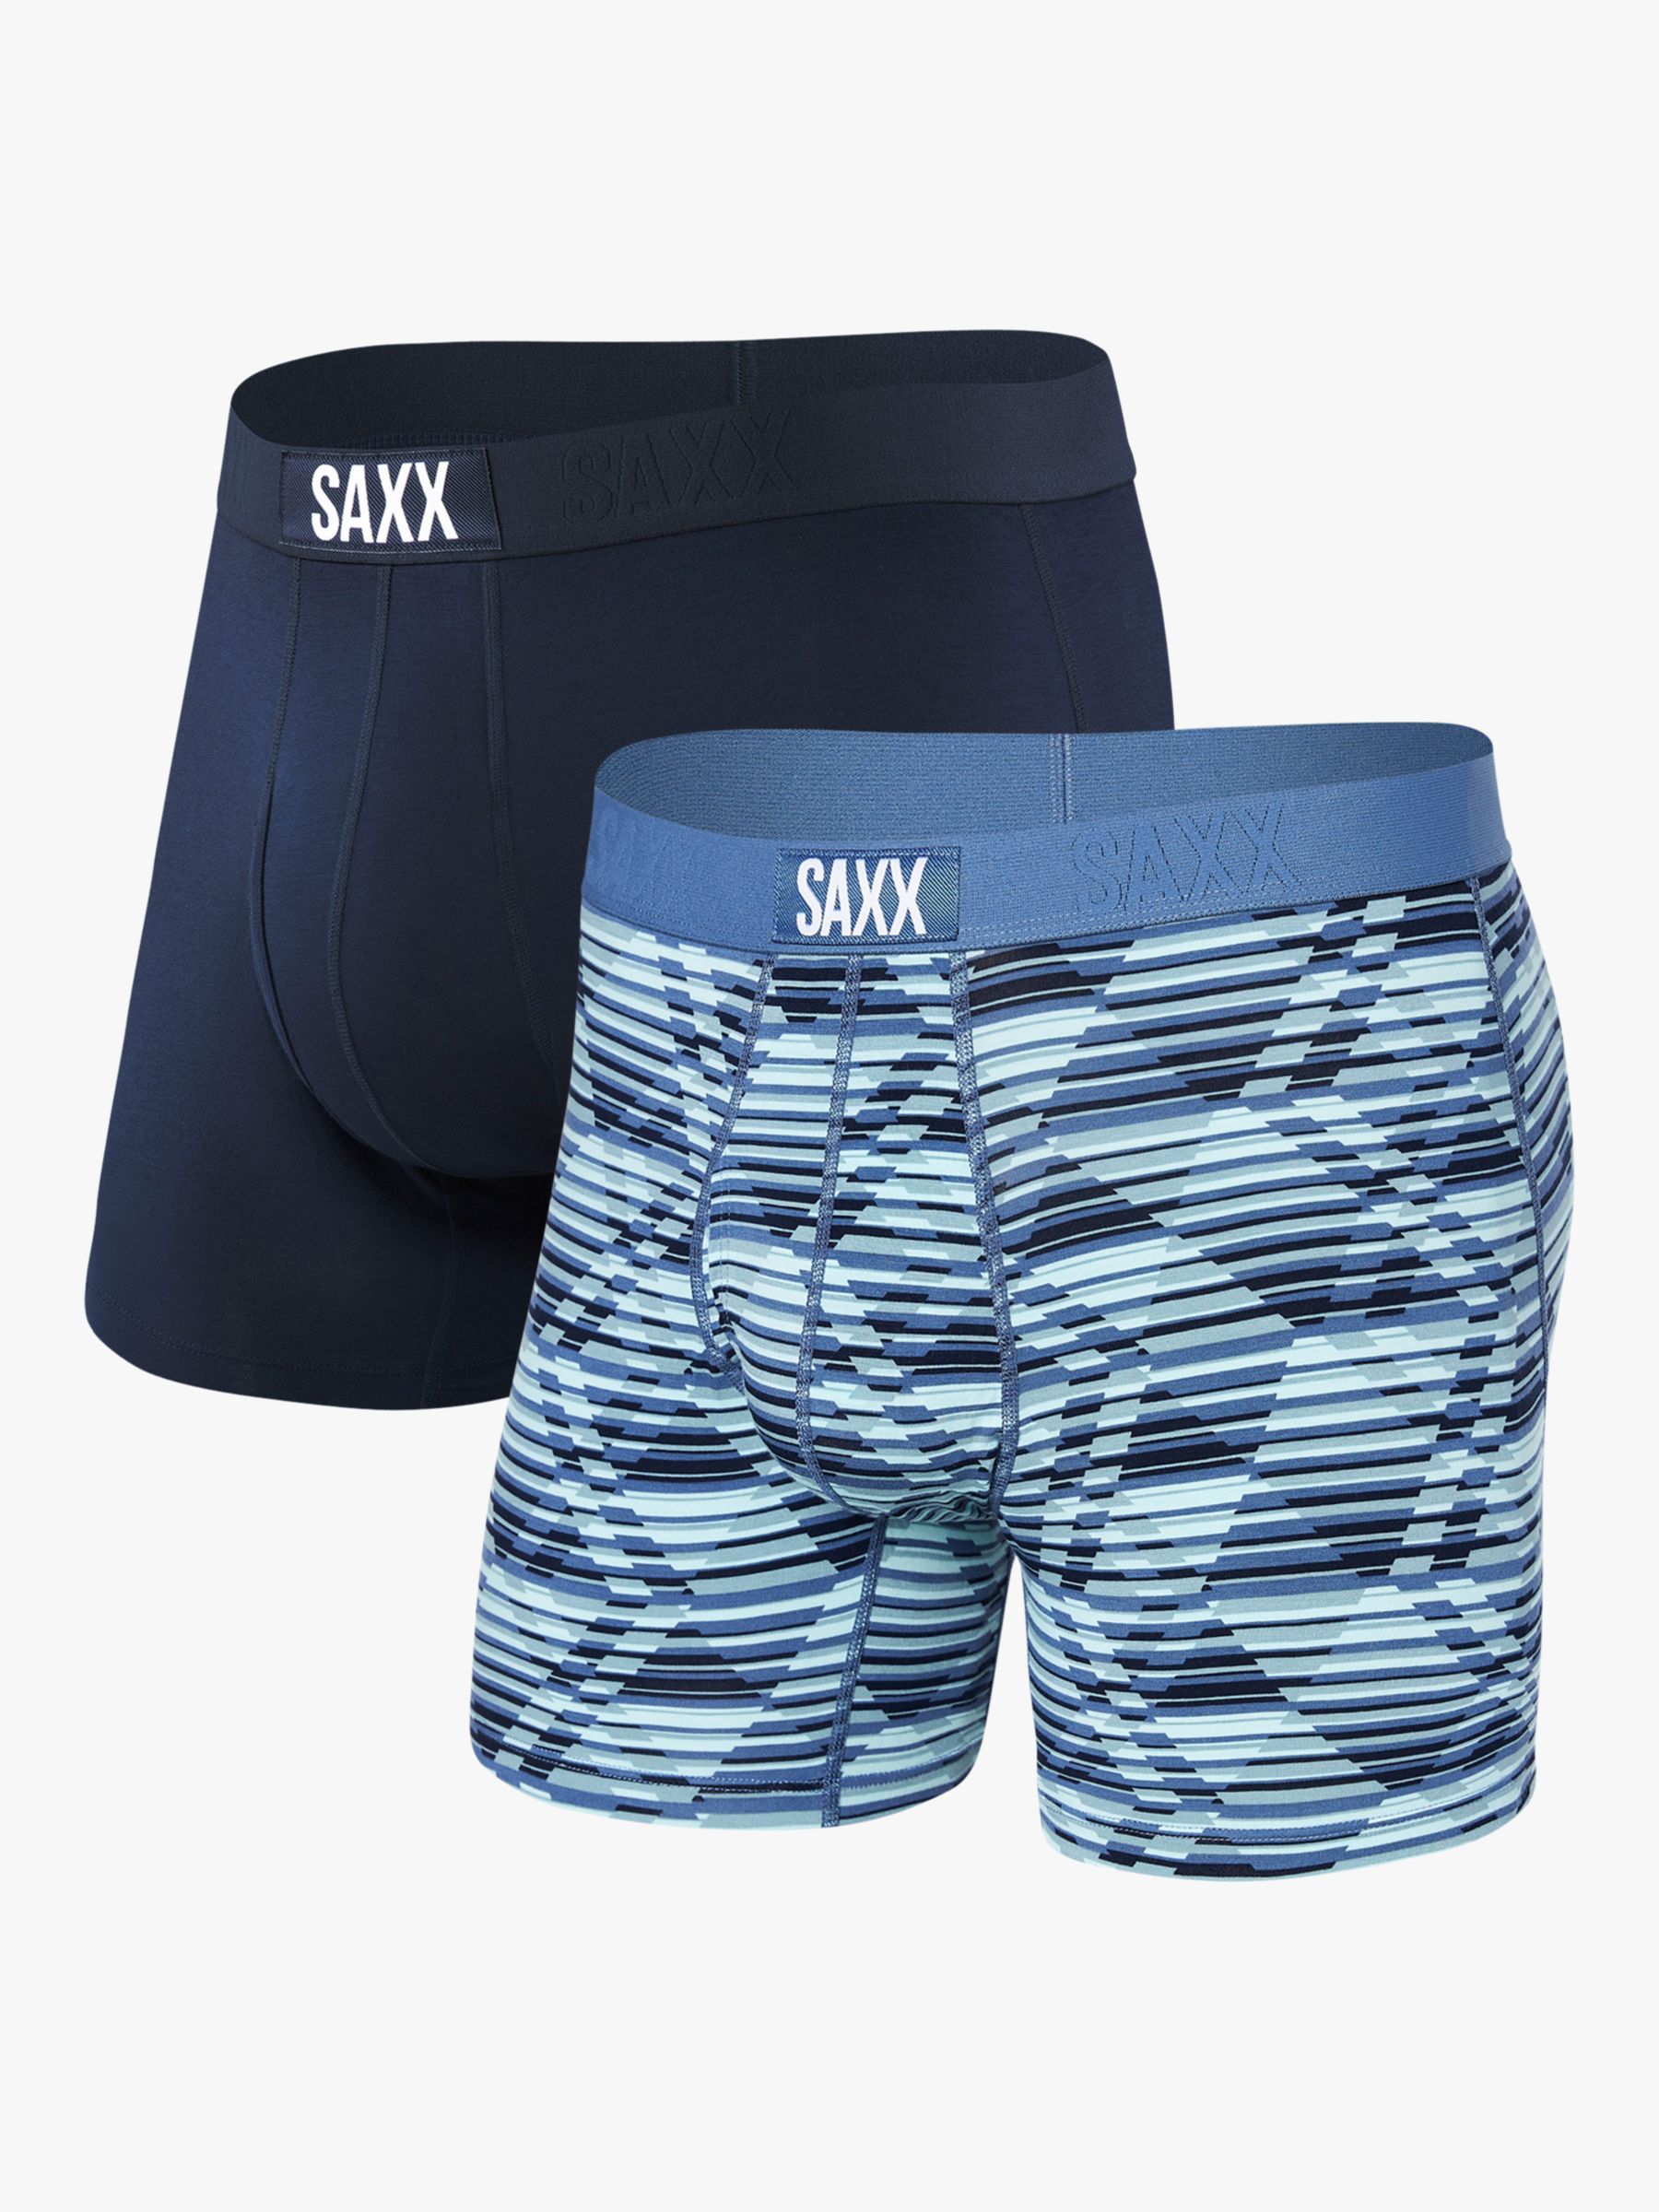 Buy SAXX Ultra Relaxed Fit Trunks, Pack of 2, Blue Online at johnlewis.com